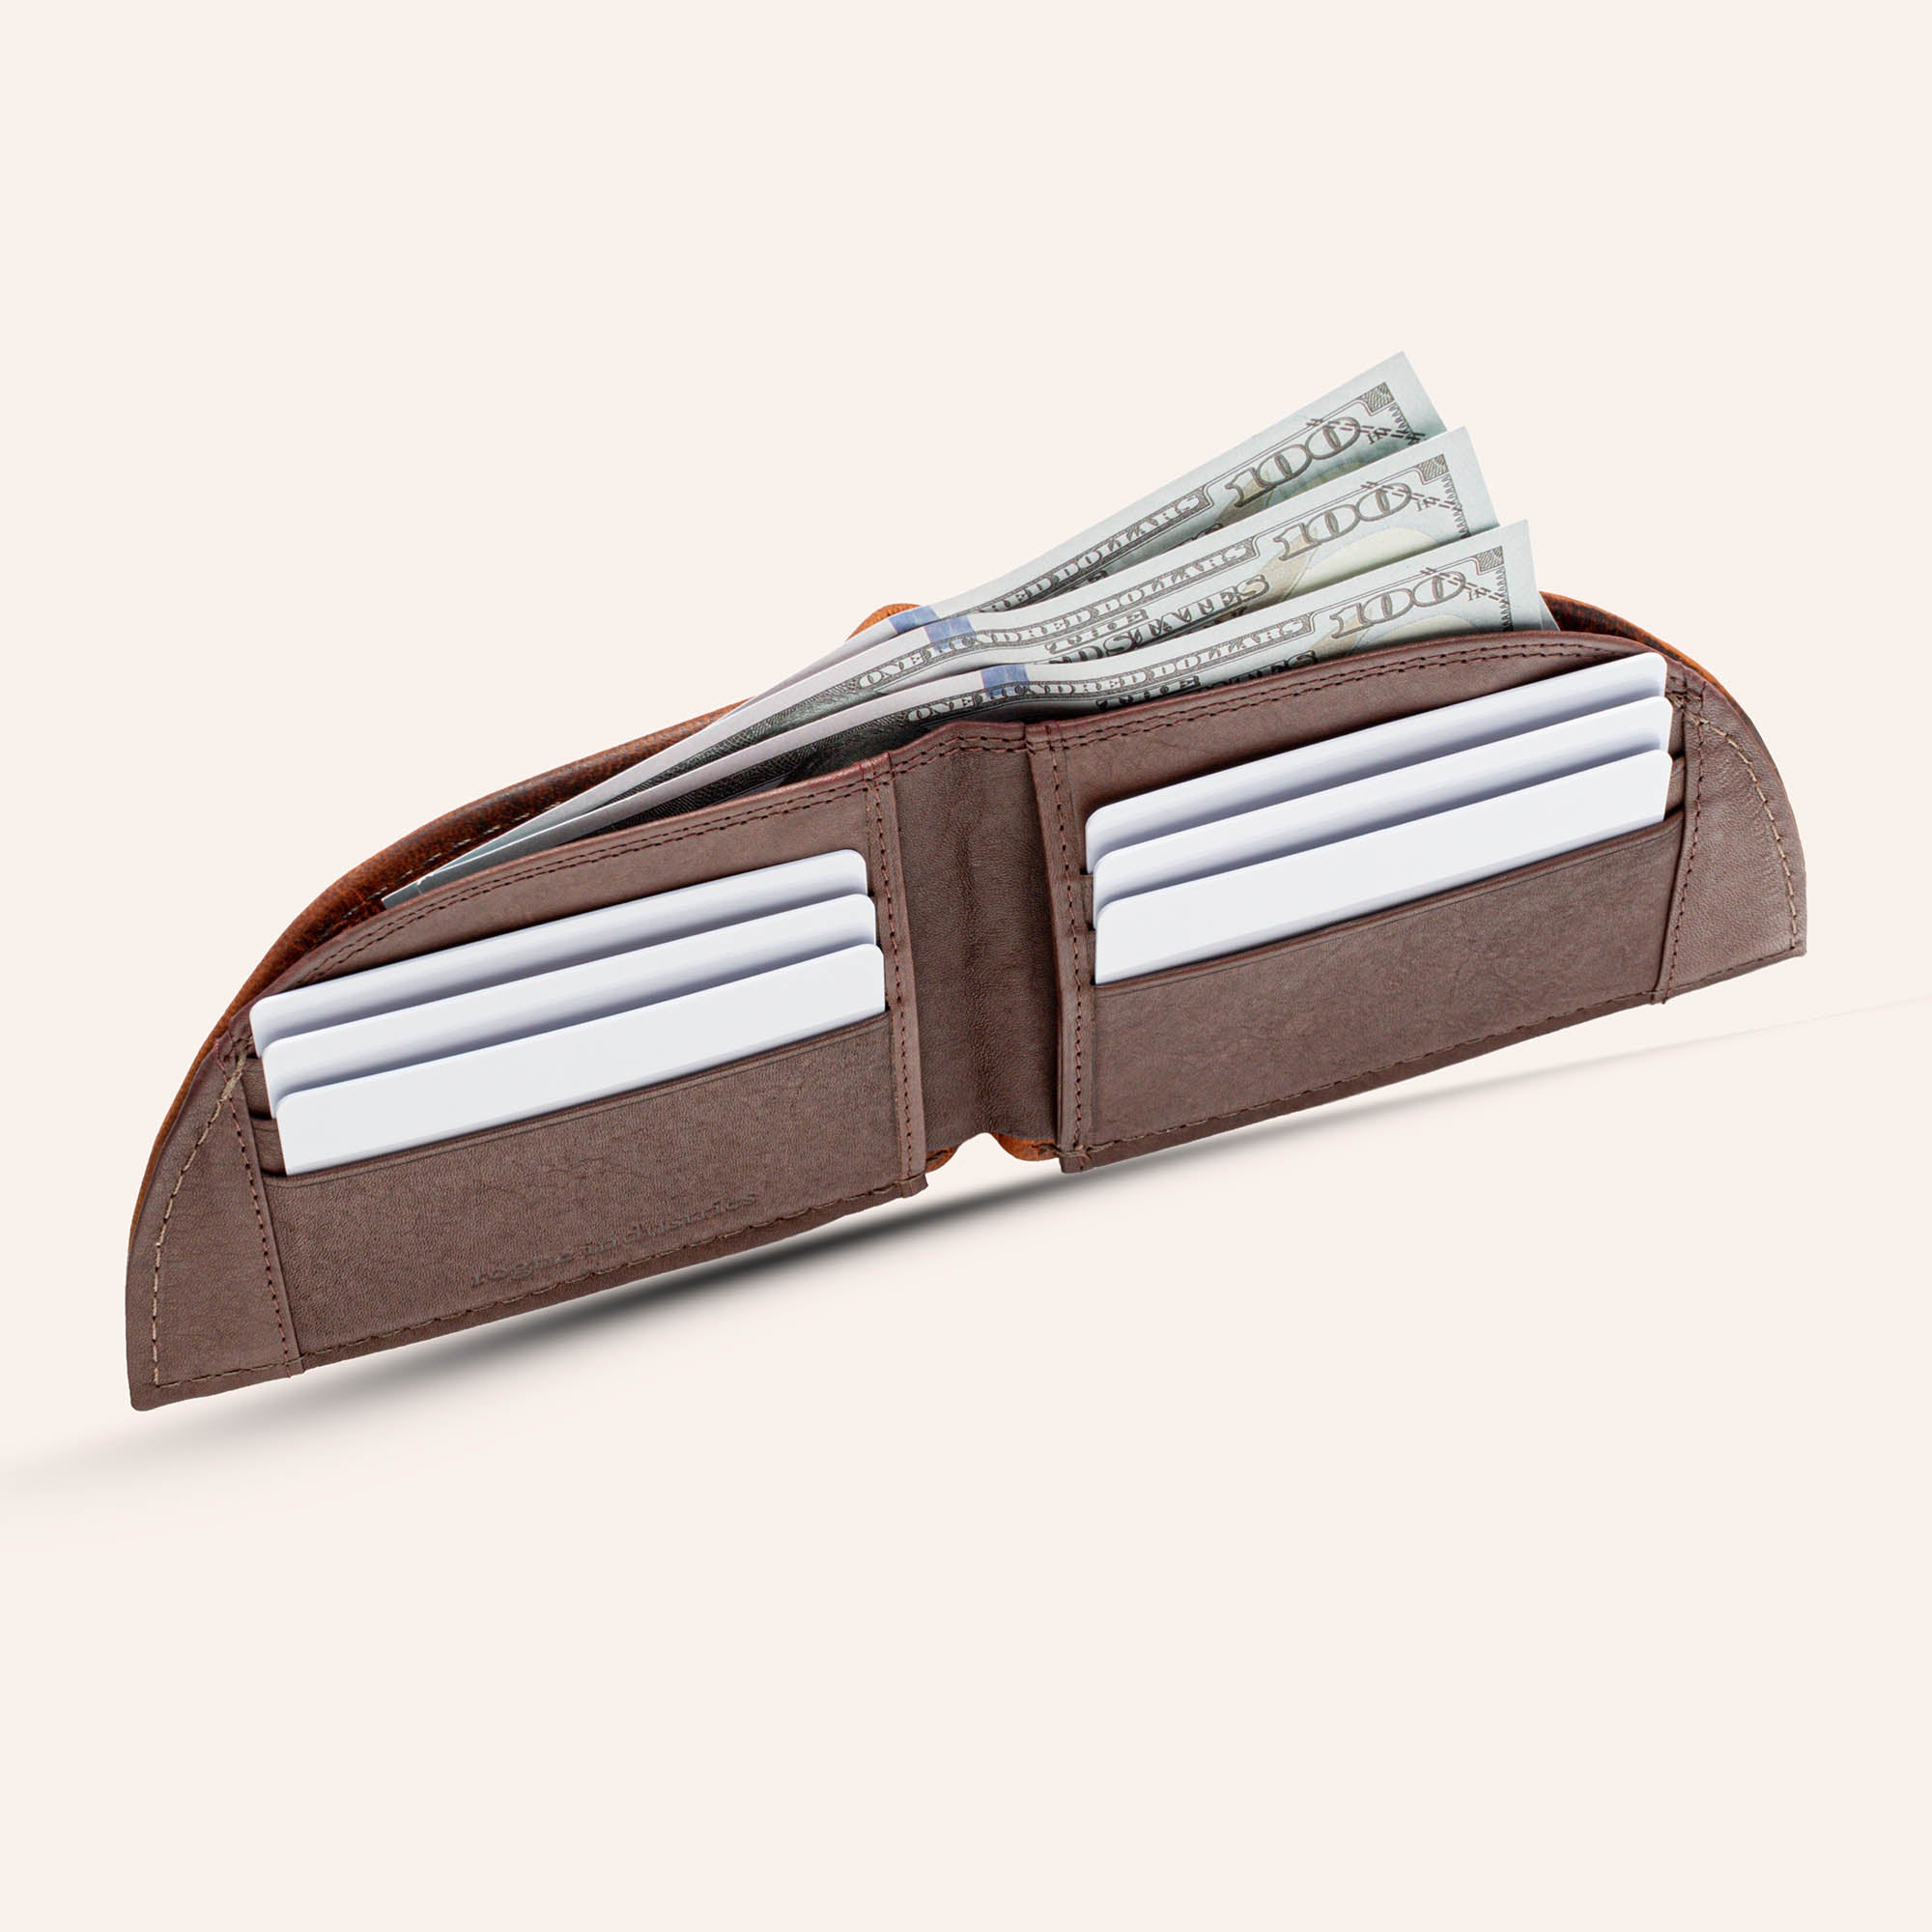 Minimalist Wallet with Money Clip, Gray with Red Thread by Rogue Industries